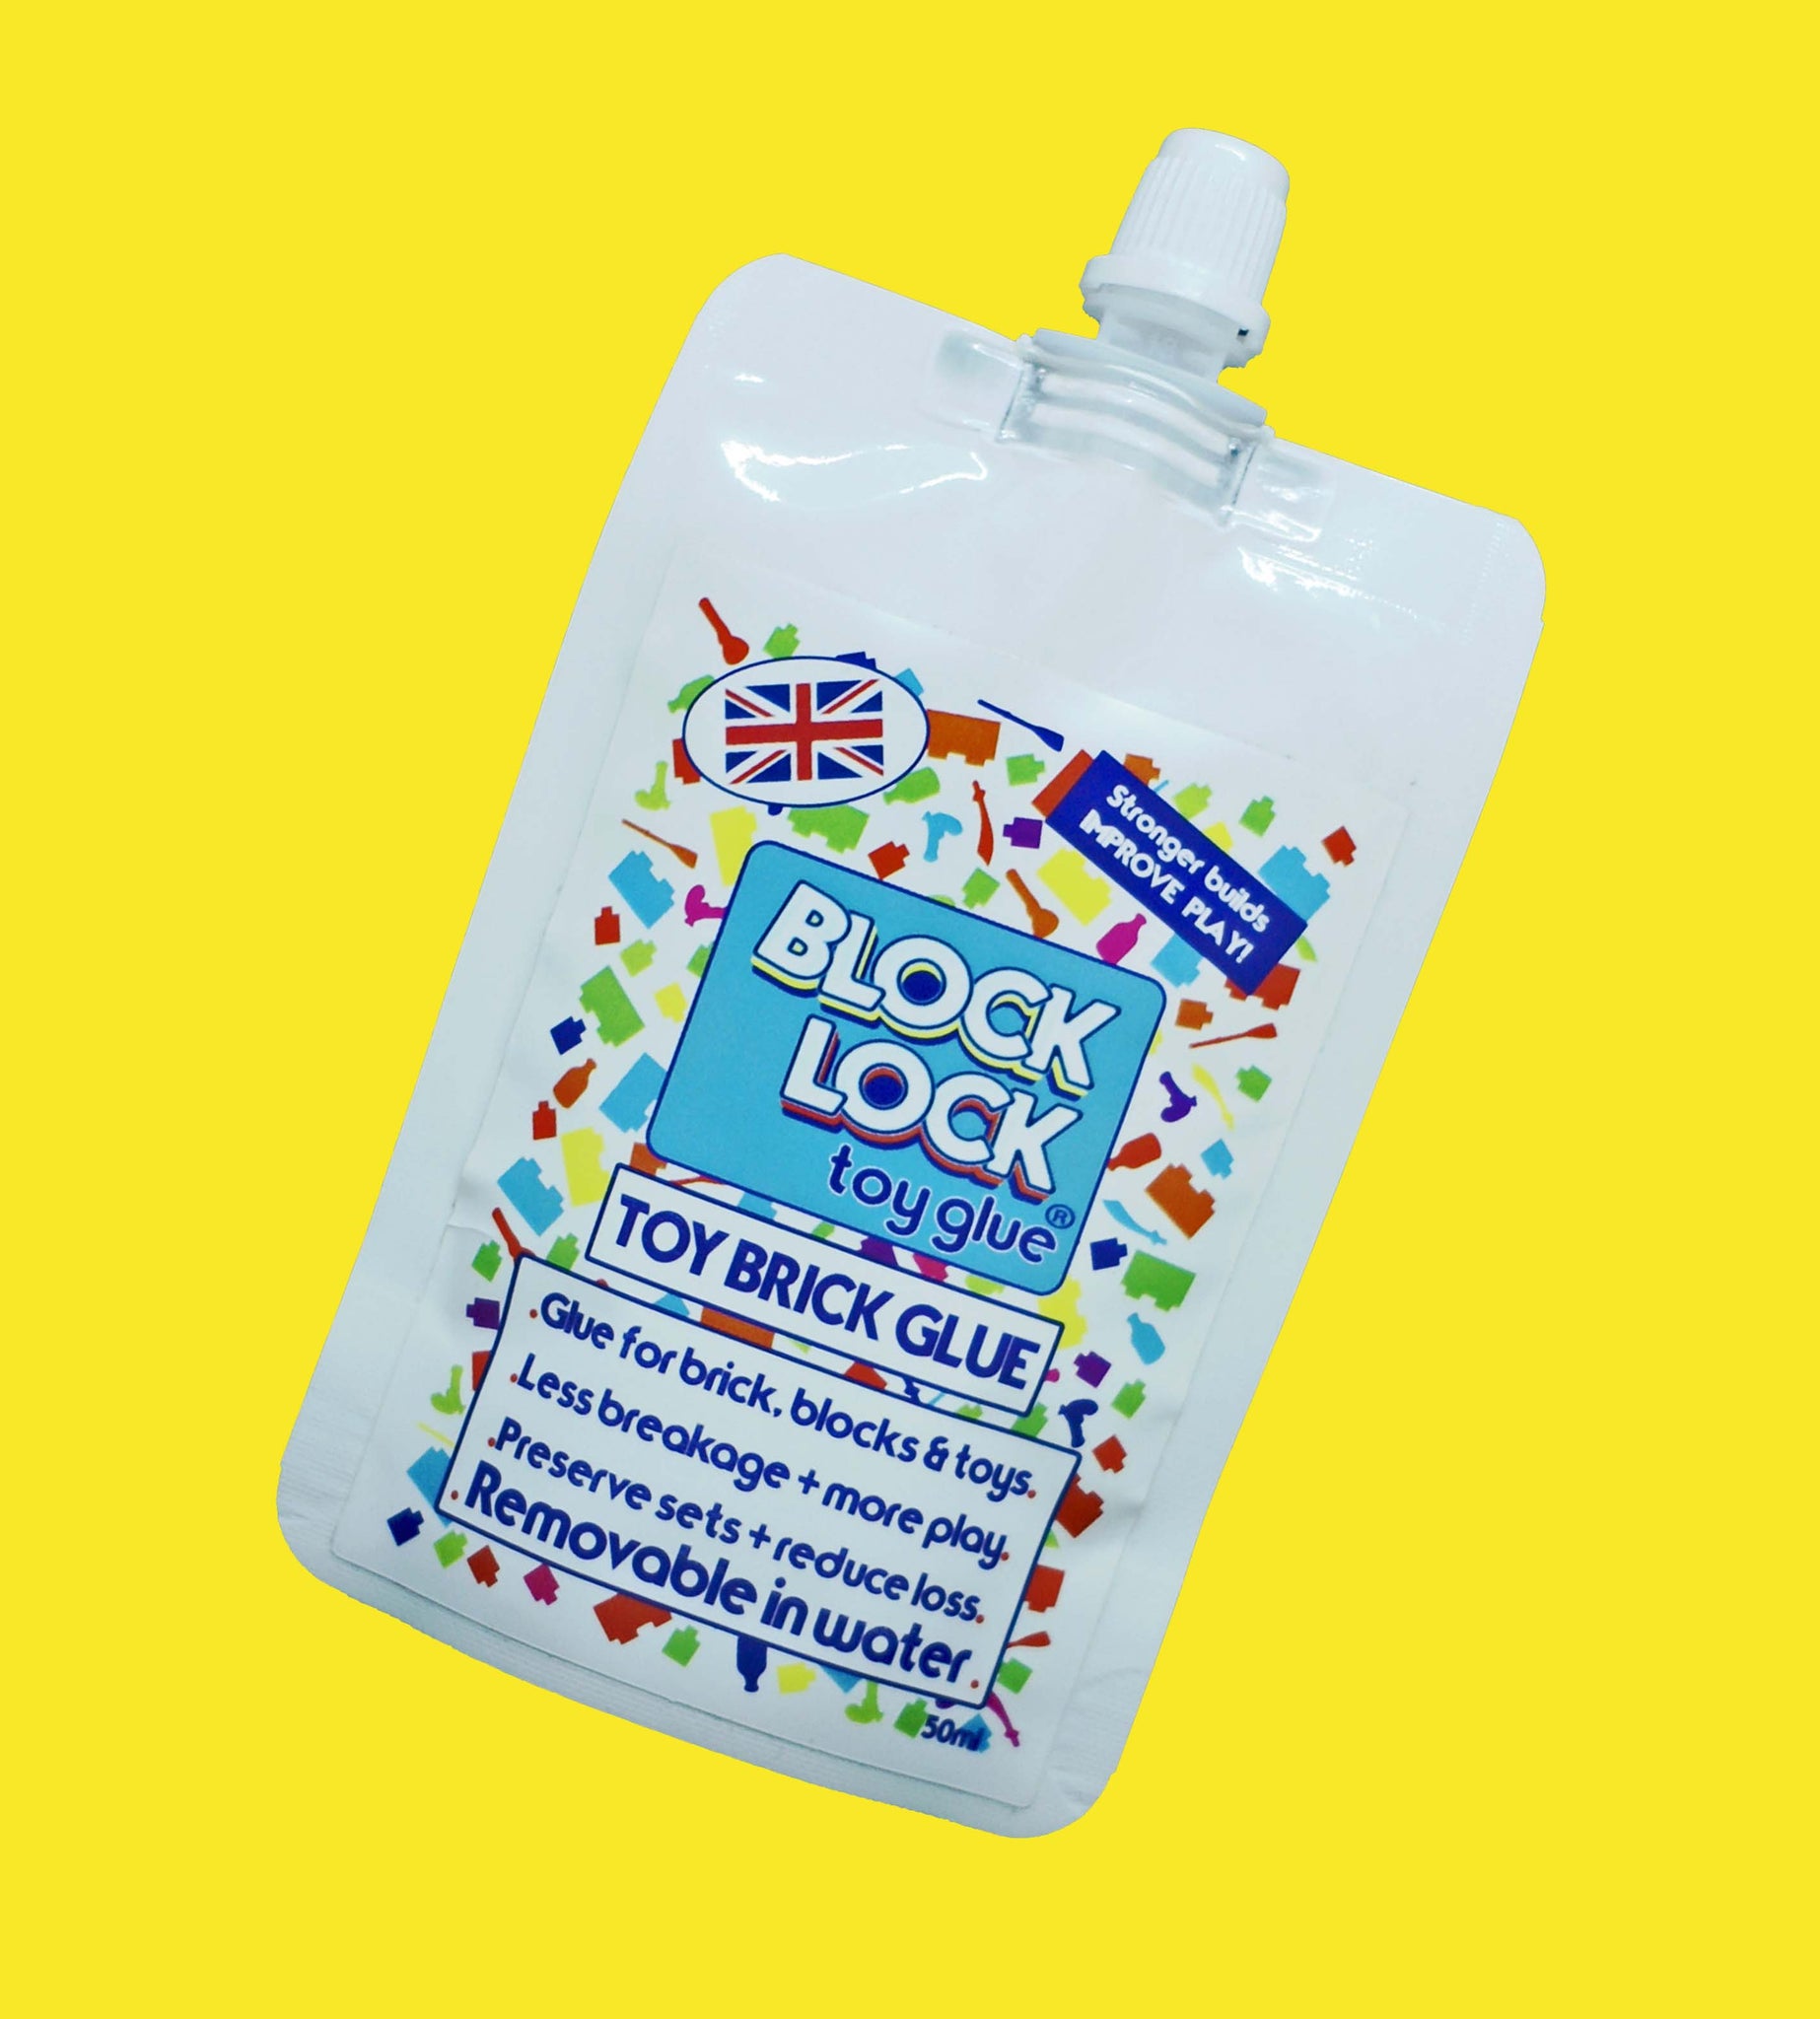 GLUE FOR TOY LEGO bricks sets kits compatible with many toy blocks